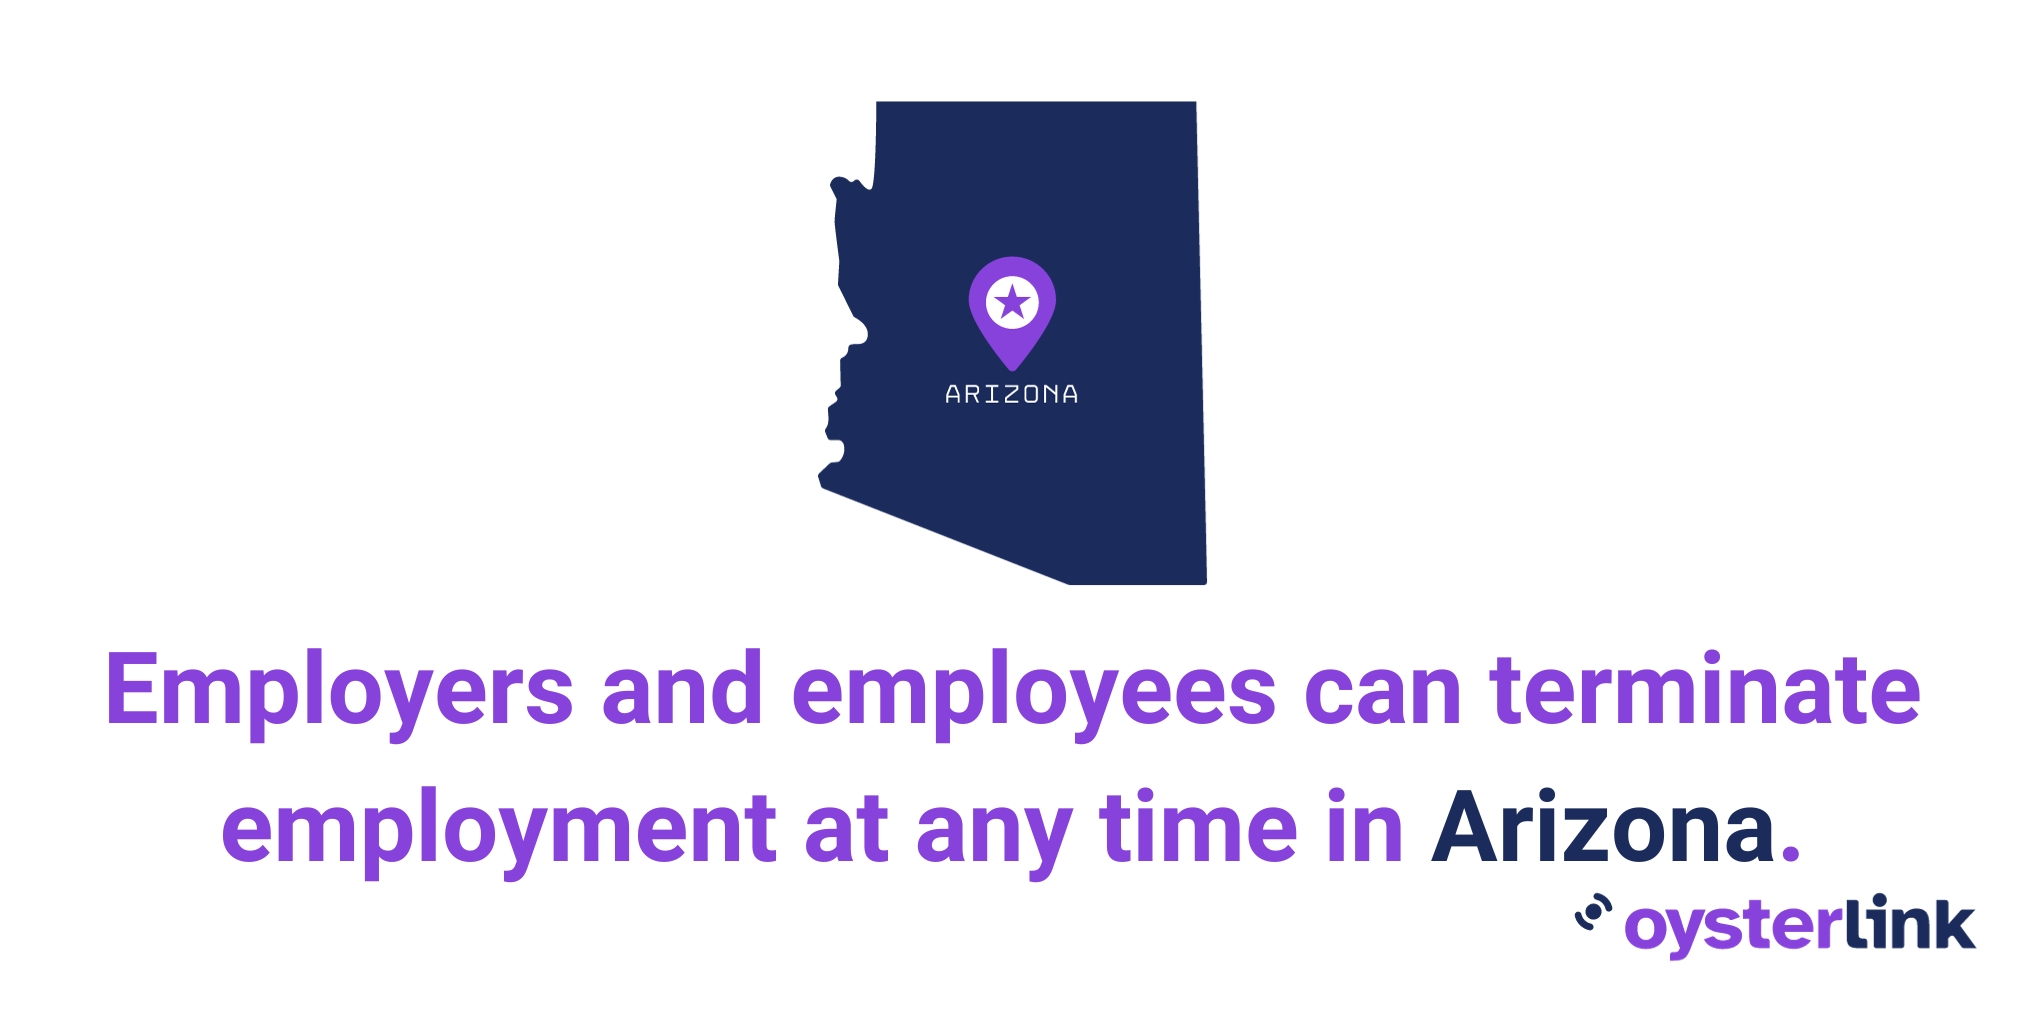 Arizona's at-will employment states that employers and employees can terminate employment at any time in Arizona